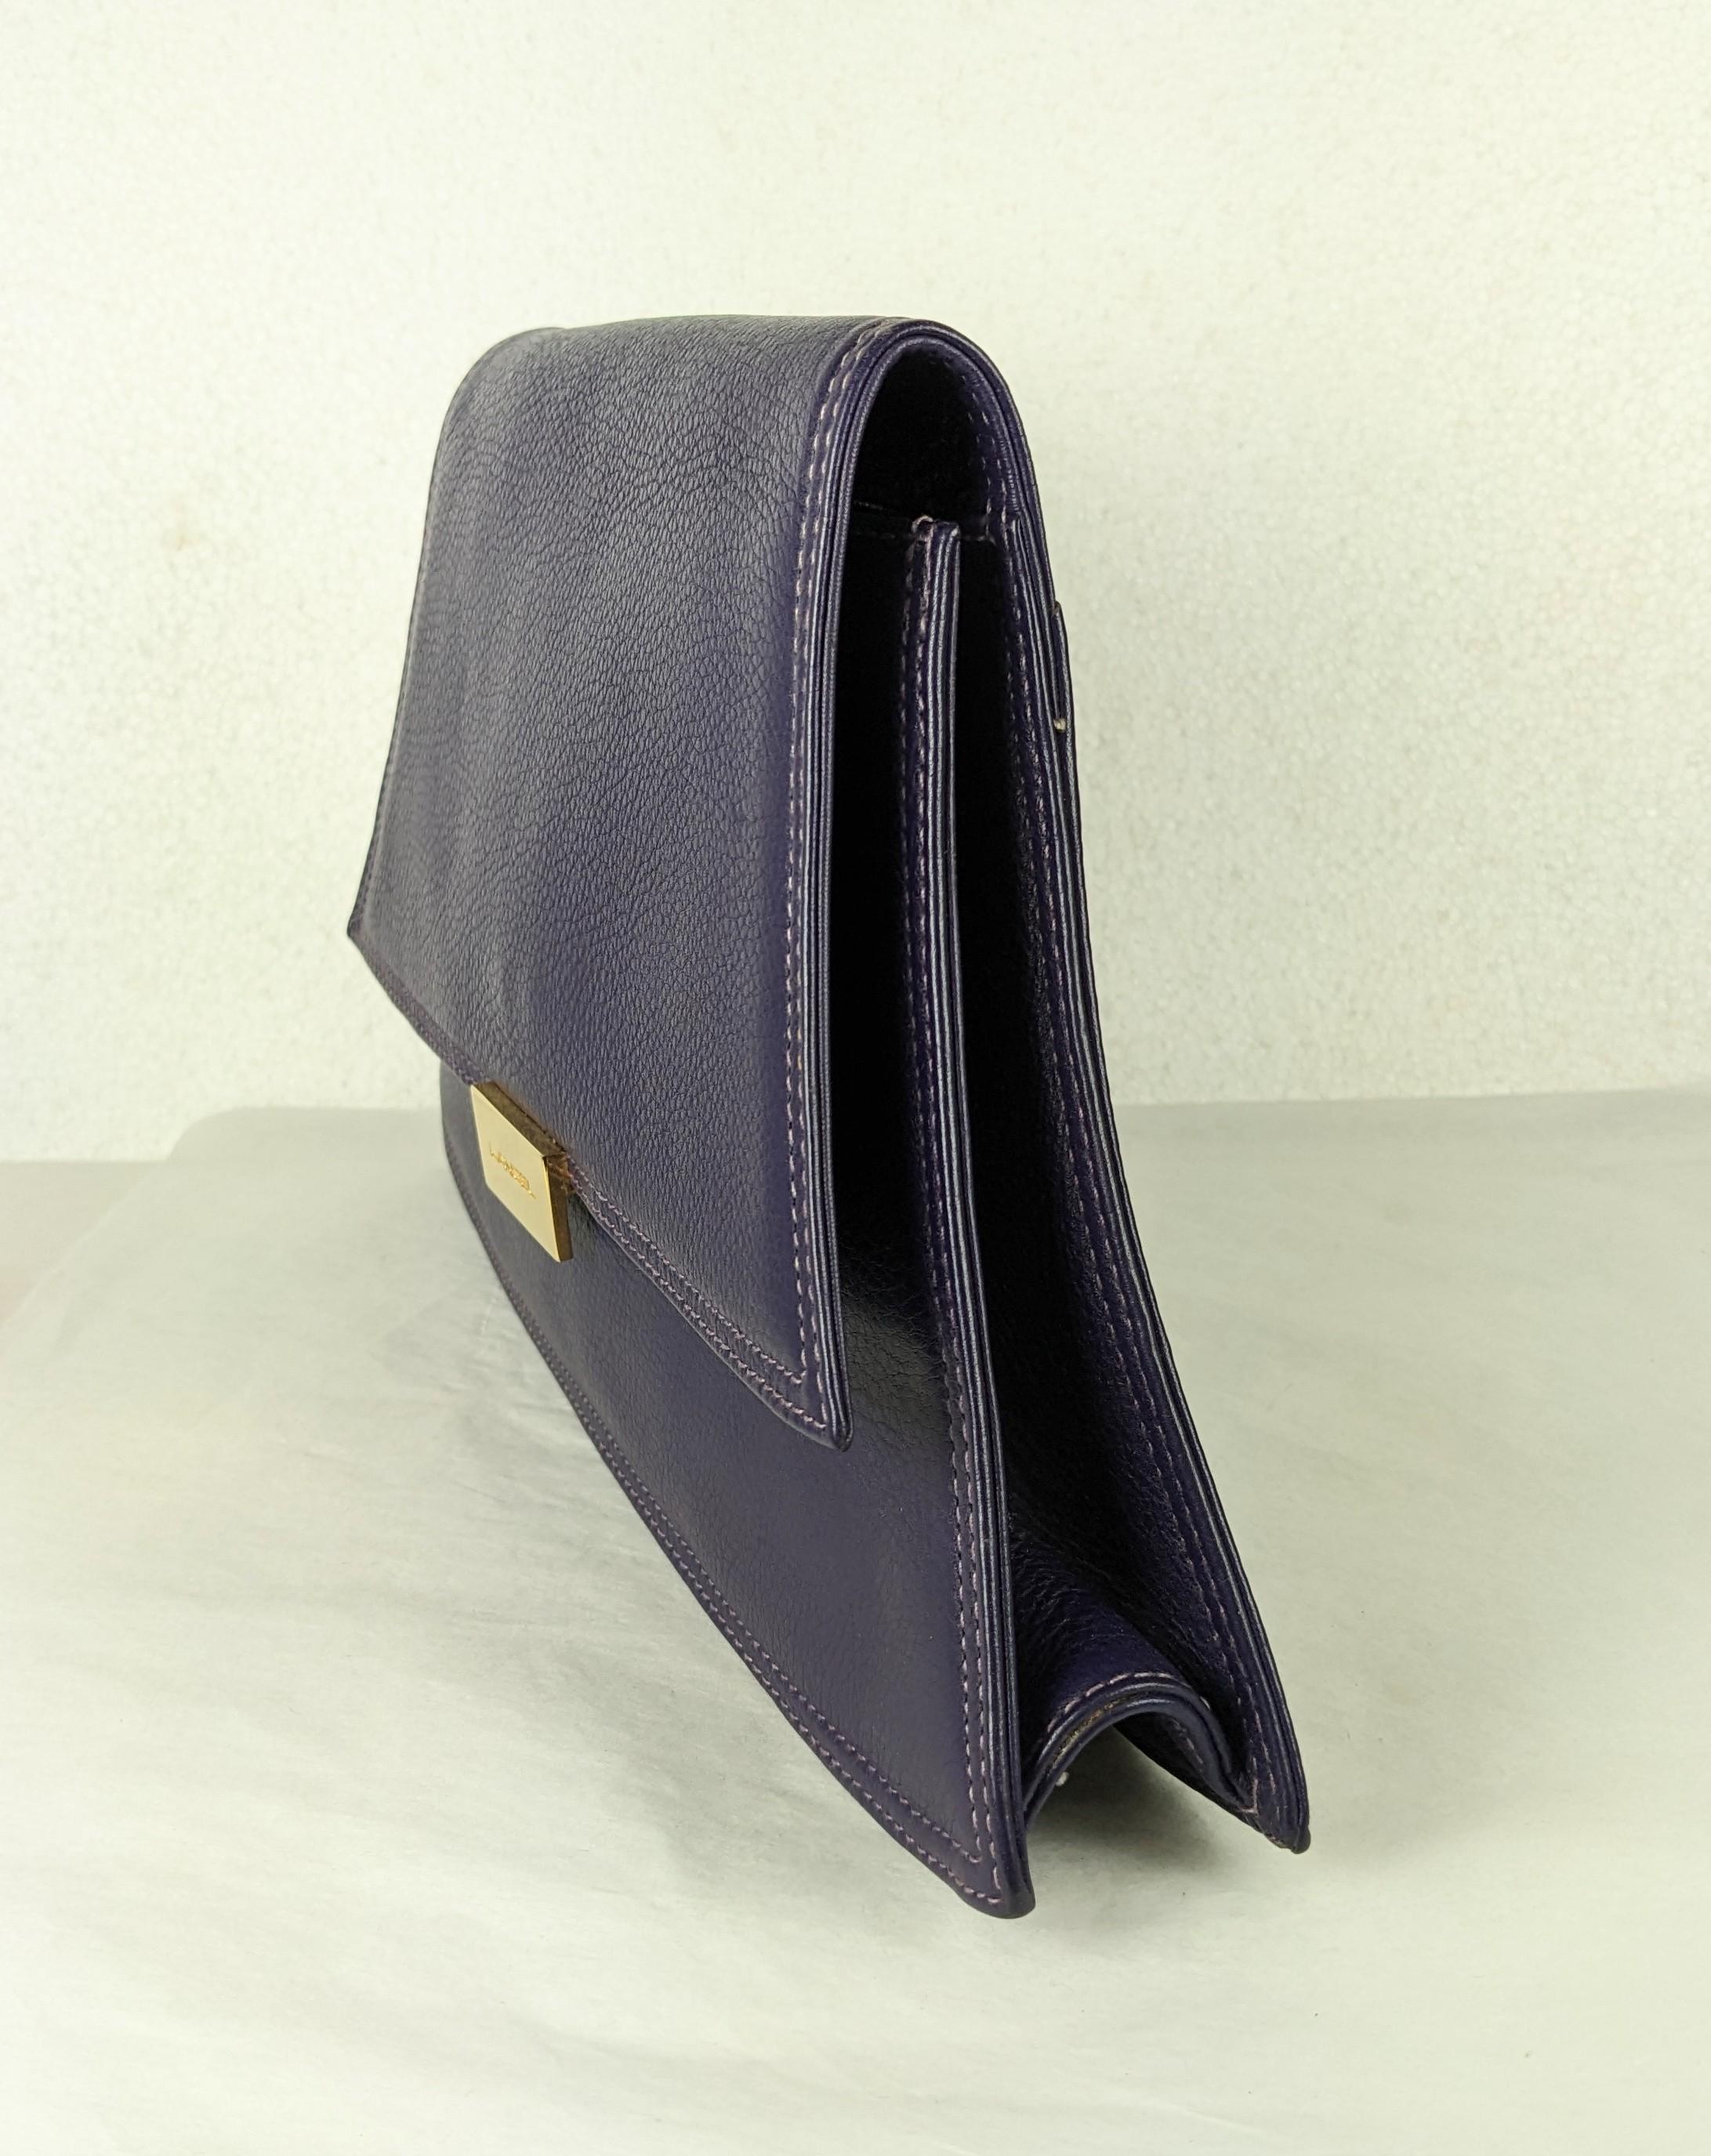 Lancel Purple Shaped Clutch In Excellent Condition For Sale In New York, NY